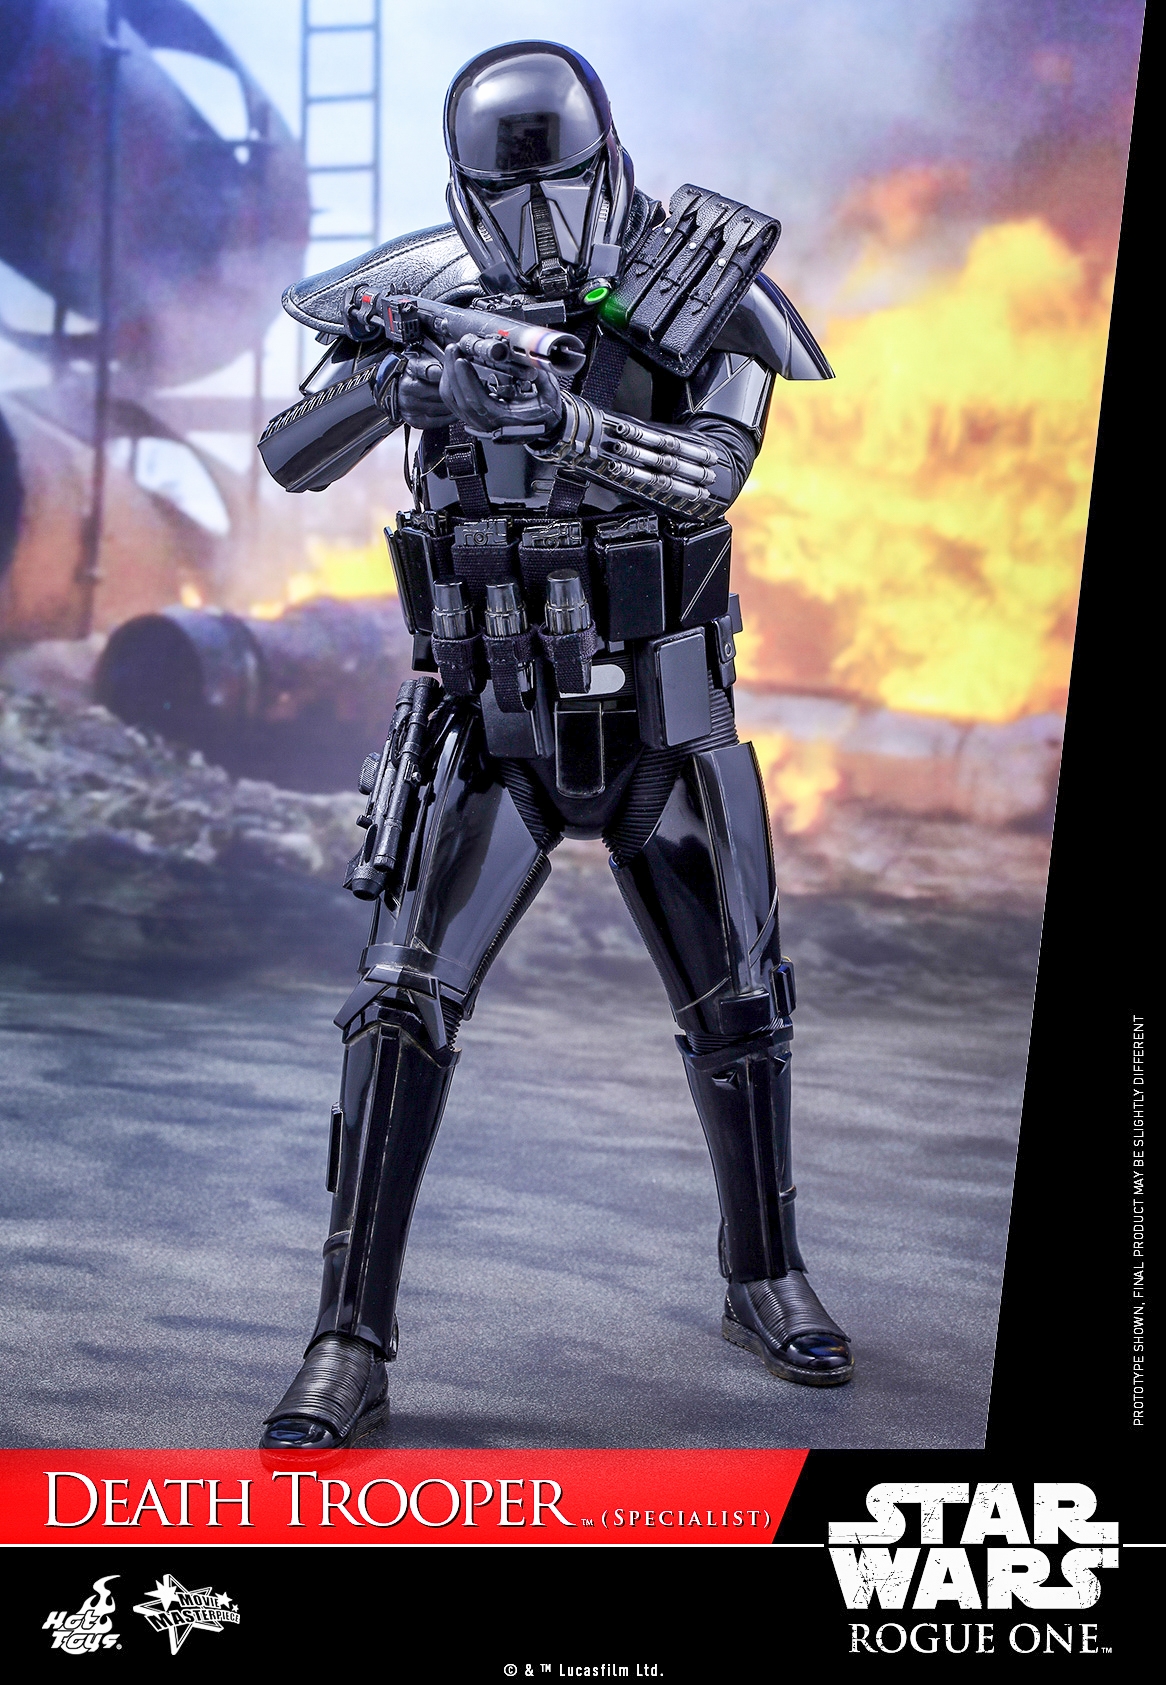 Hot-Toys-MMS385-Rogue-One-Death-Trooper-Specialist-004.jpg